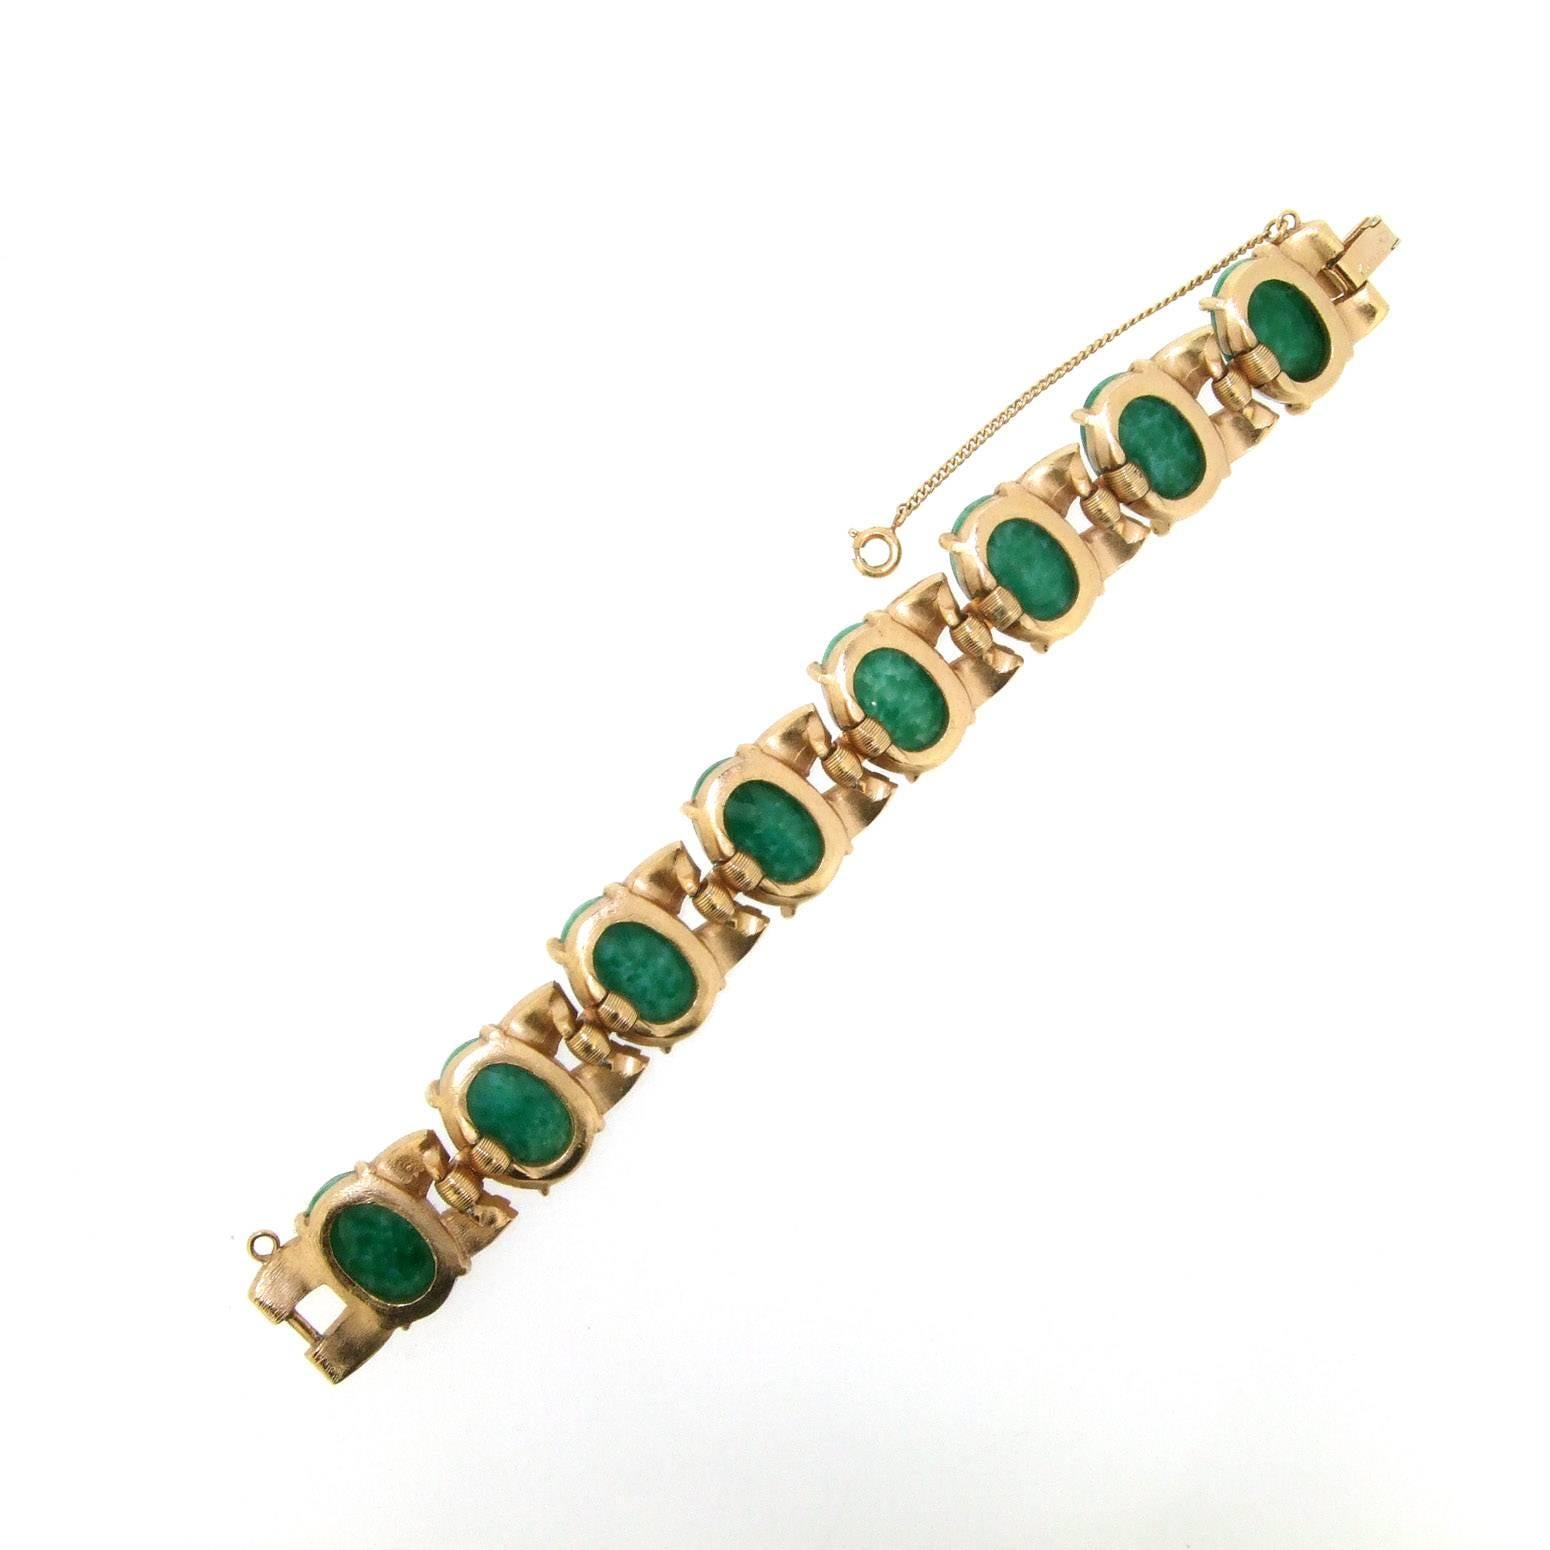 Vintage Jade Effect Glass Bracelet by Trifari In Excellent Condition For Sale In London, GB